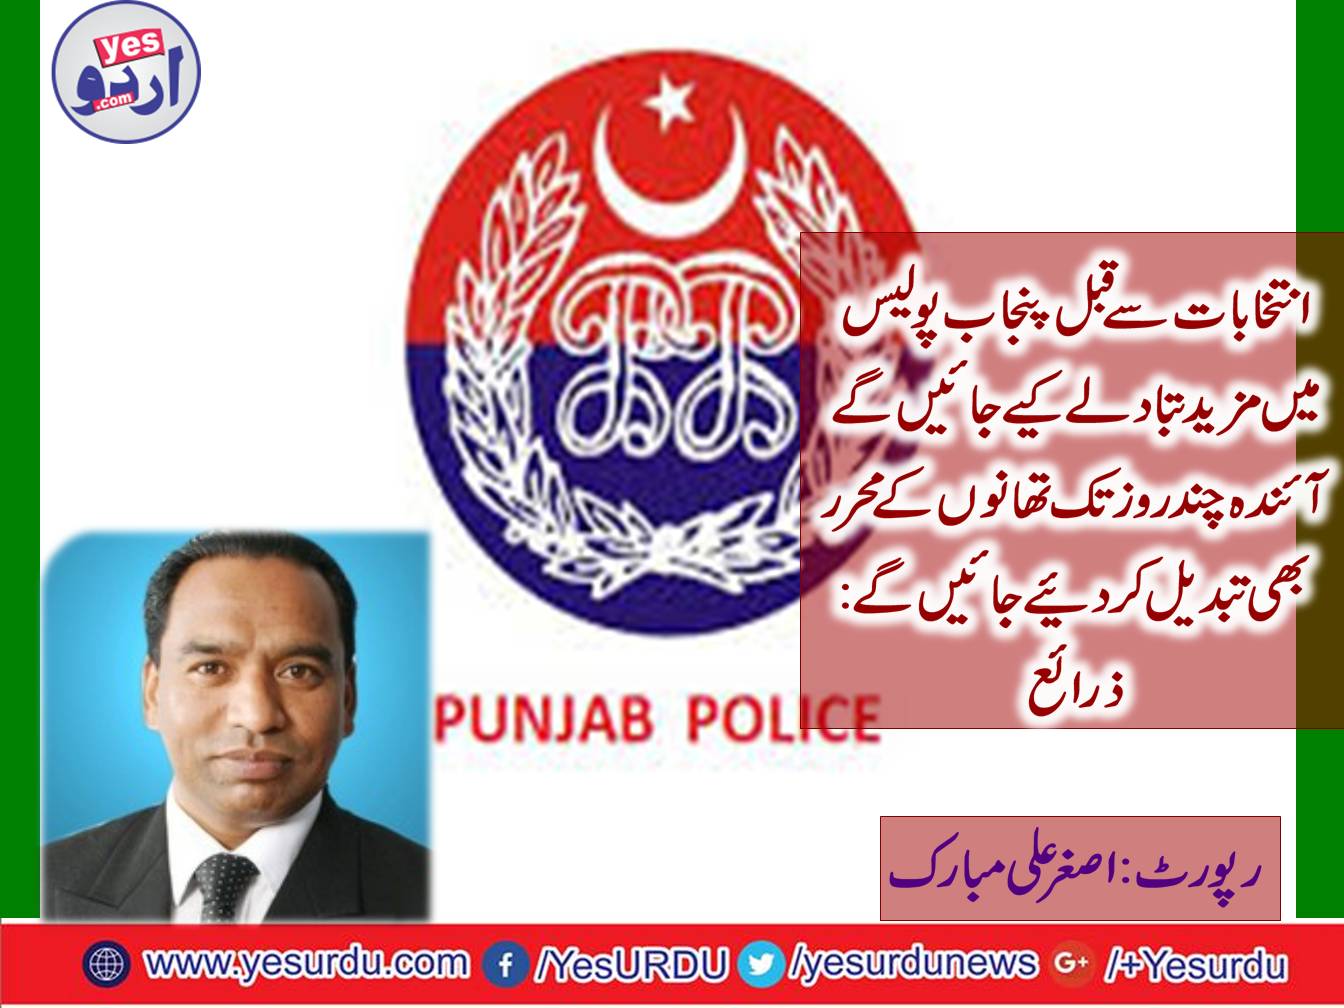 Punjab police had more exchanges before the elections until the next few days the police stations clerk will be changed: sources